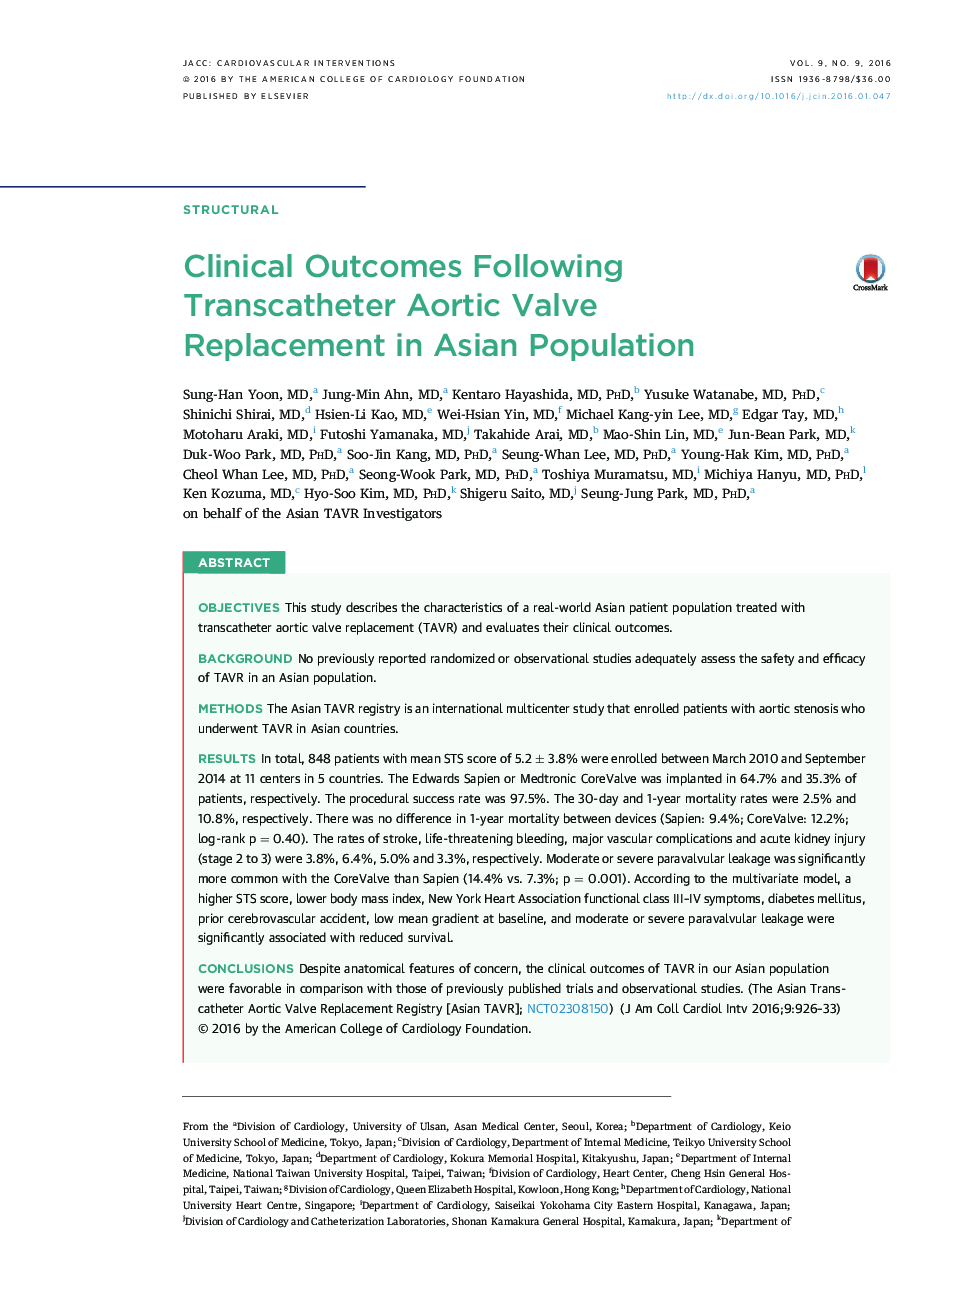 Clinical Outcomes Following Transcatheter Aortic Valve Replacement in Asian Population 